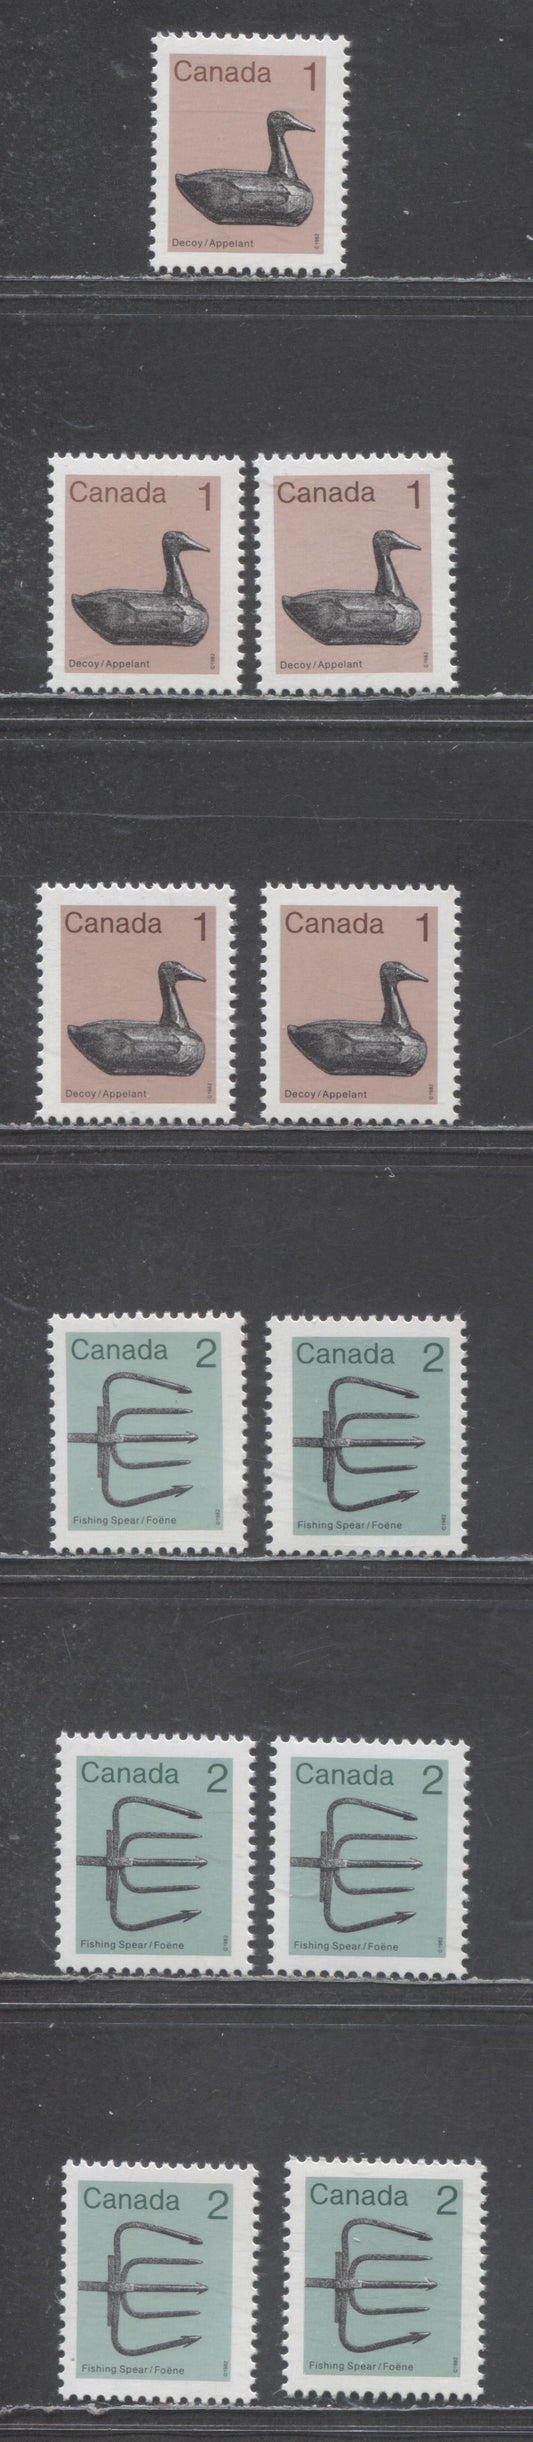 Lot 284 Canada #917iii,iv, 918ii,iii 1c & 2c Light Brown/Green & Multicolored Decoy - Fishing Spear, 1982-1897 Low-Value Artifact Definitives, 11 VFNH Singles On LF/LF, LF/F, Unlisted & Scarce F/HF Rolland Papers